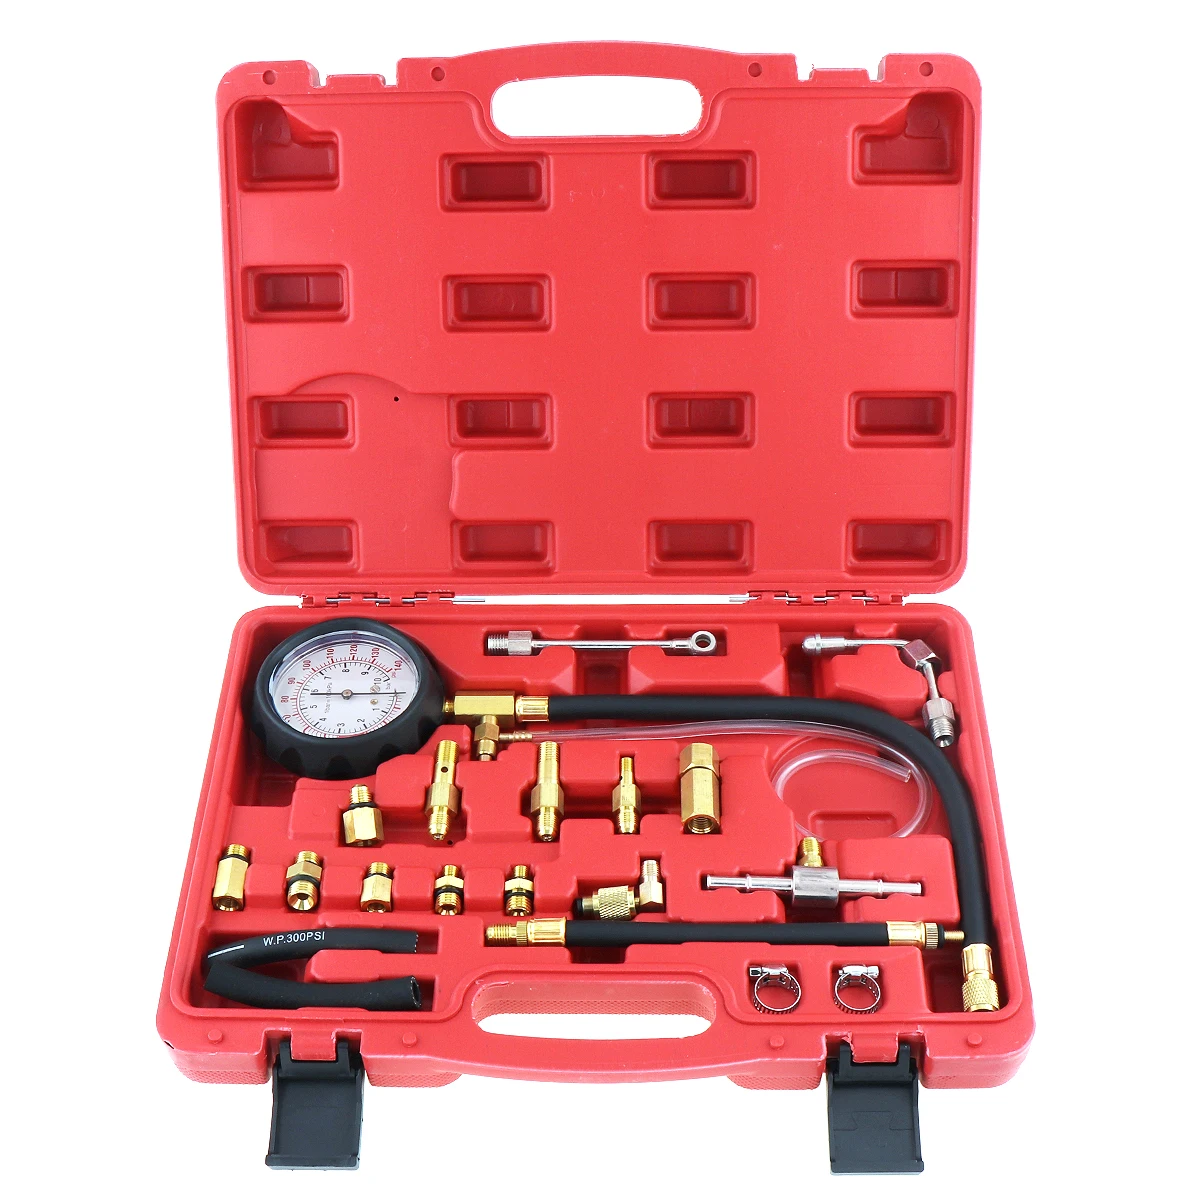 TU-114 0-140PSI / 0-10 Bar Portable Compression Fuel Injection Pressure Auto Car Diagnostic Tester Tools Kits with Safety Valve